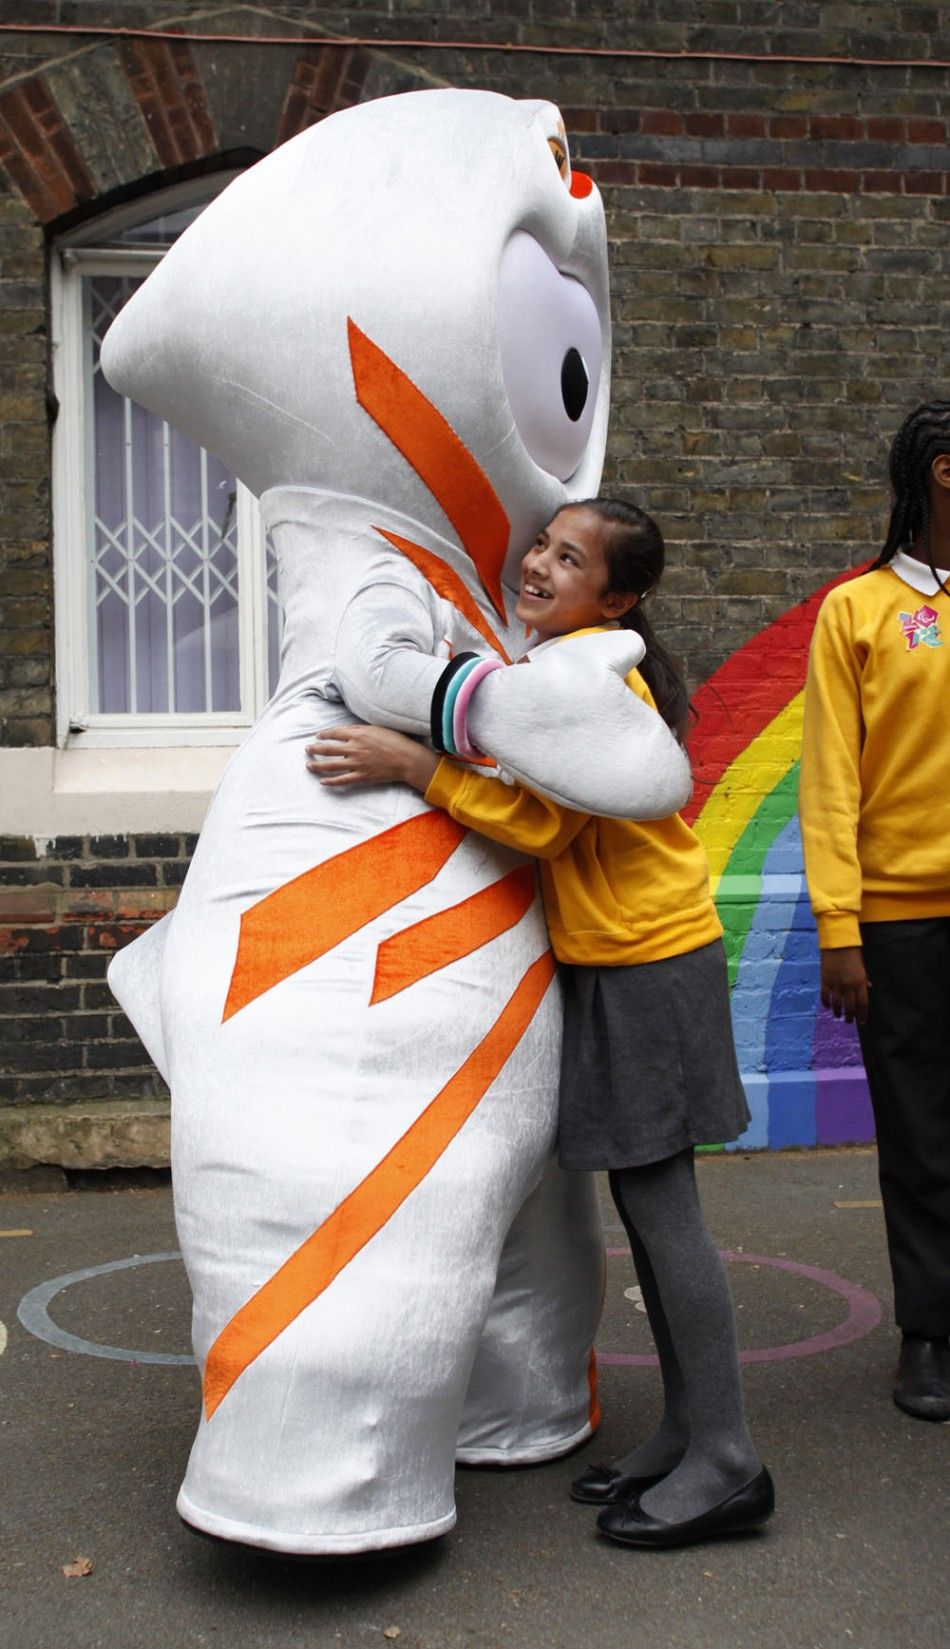 The 2012 Olympic mascot Wenlock hugs a student